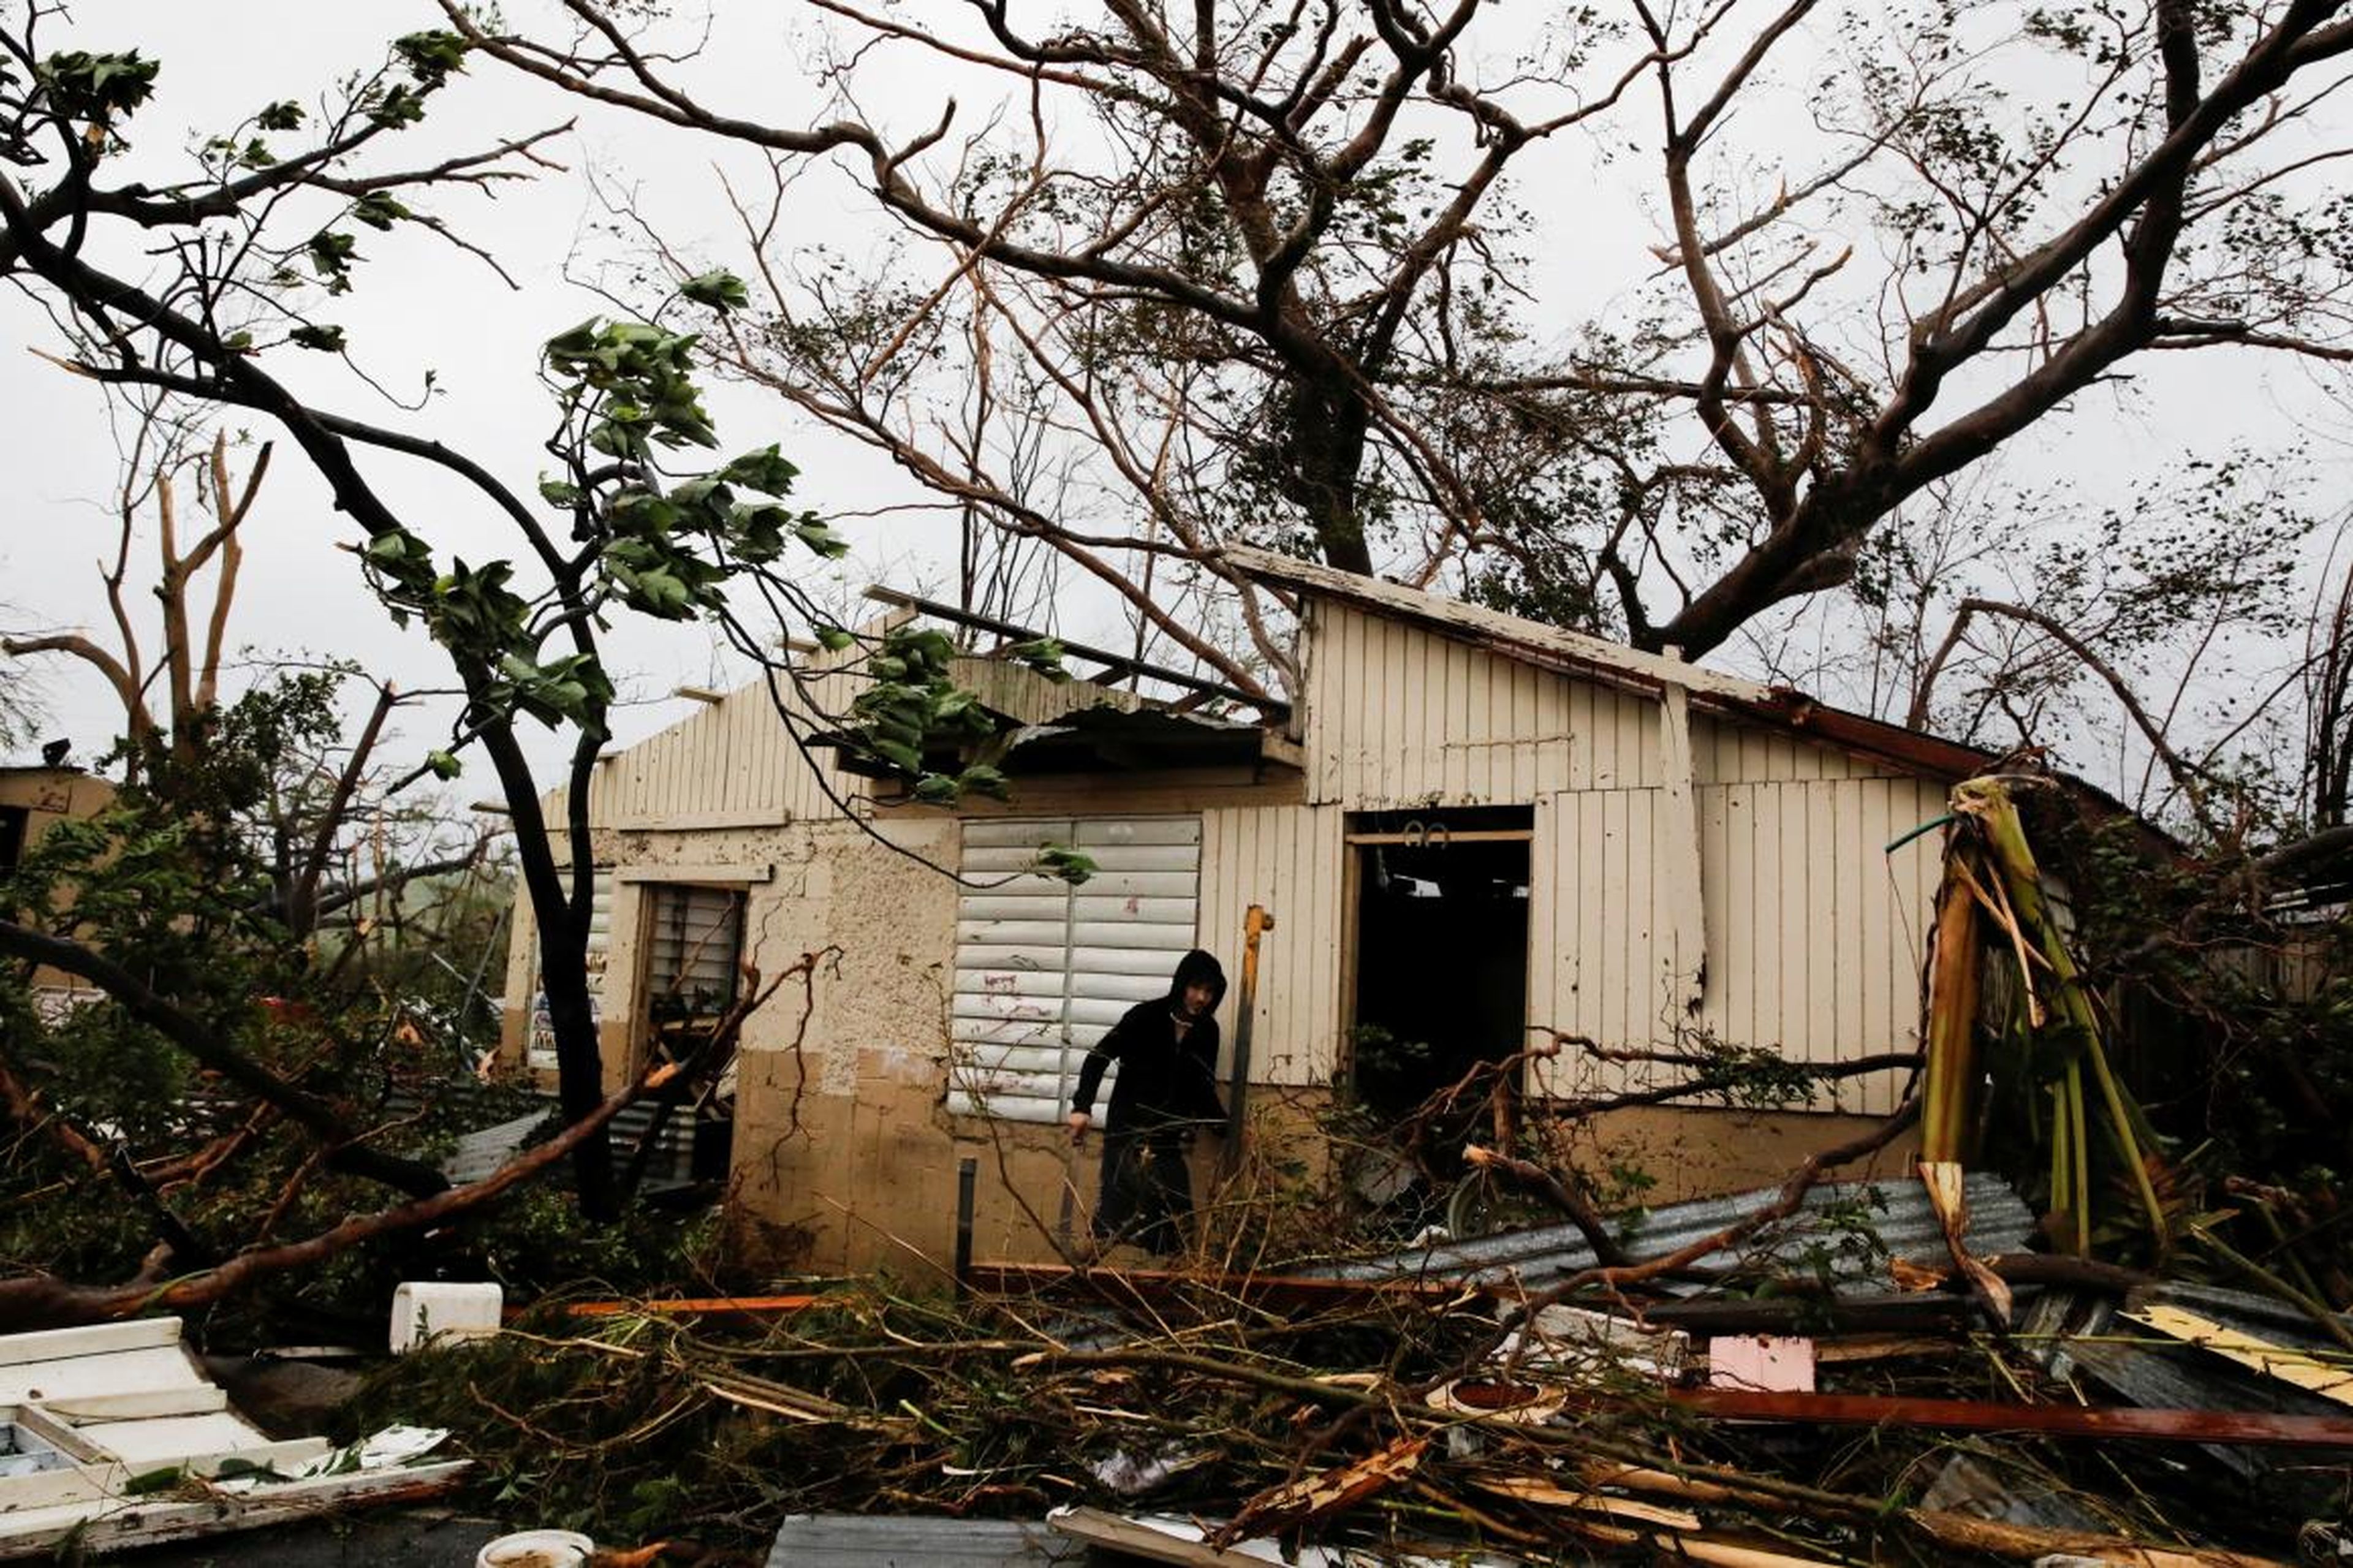 A man looks for valuables in the damaged house of a relative after the area was hit by Hurricane Maria in Guayama, Puerto Rico, on September 20, 2017.